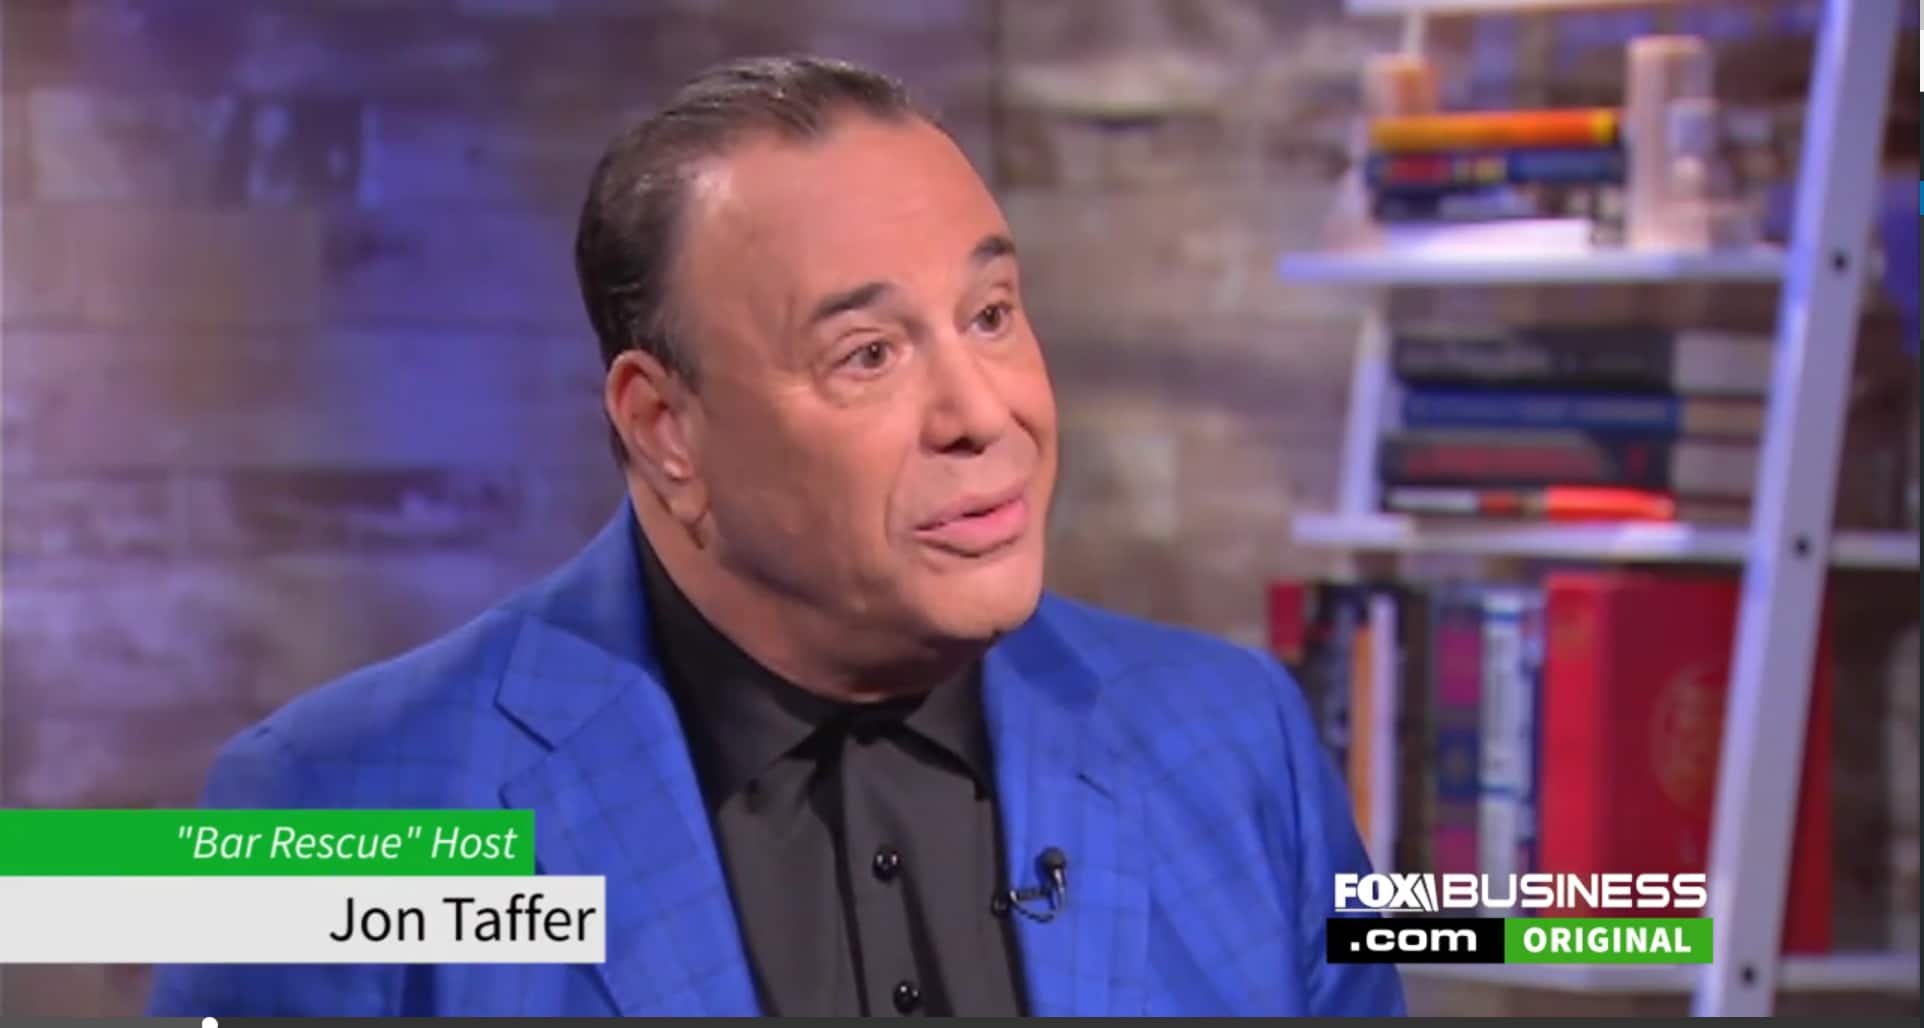 Bar Rescue’s Jon Taffer: I’m not sure I would open a bar today